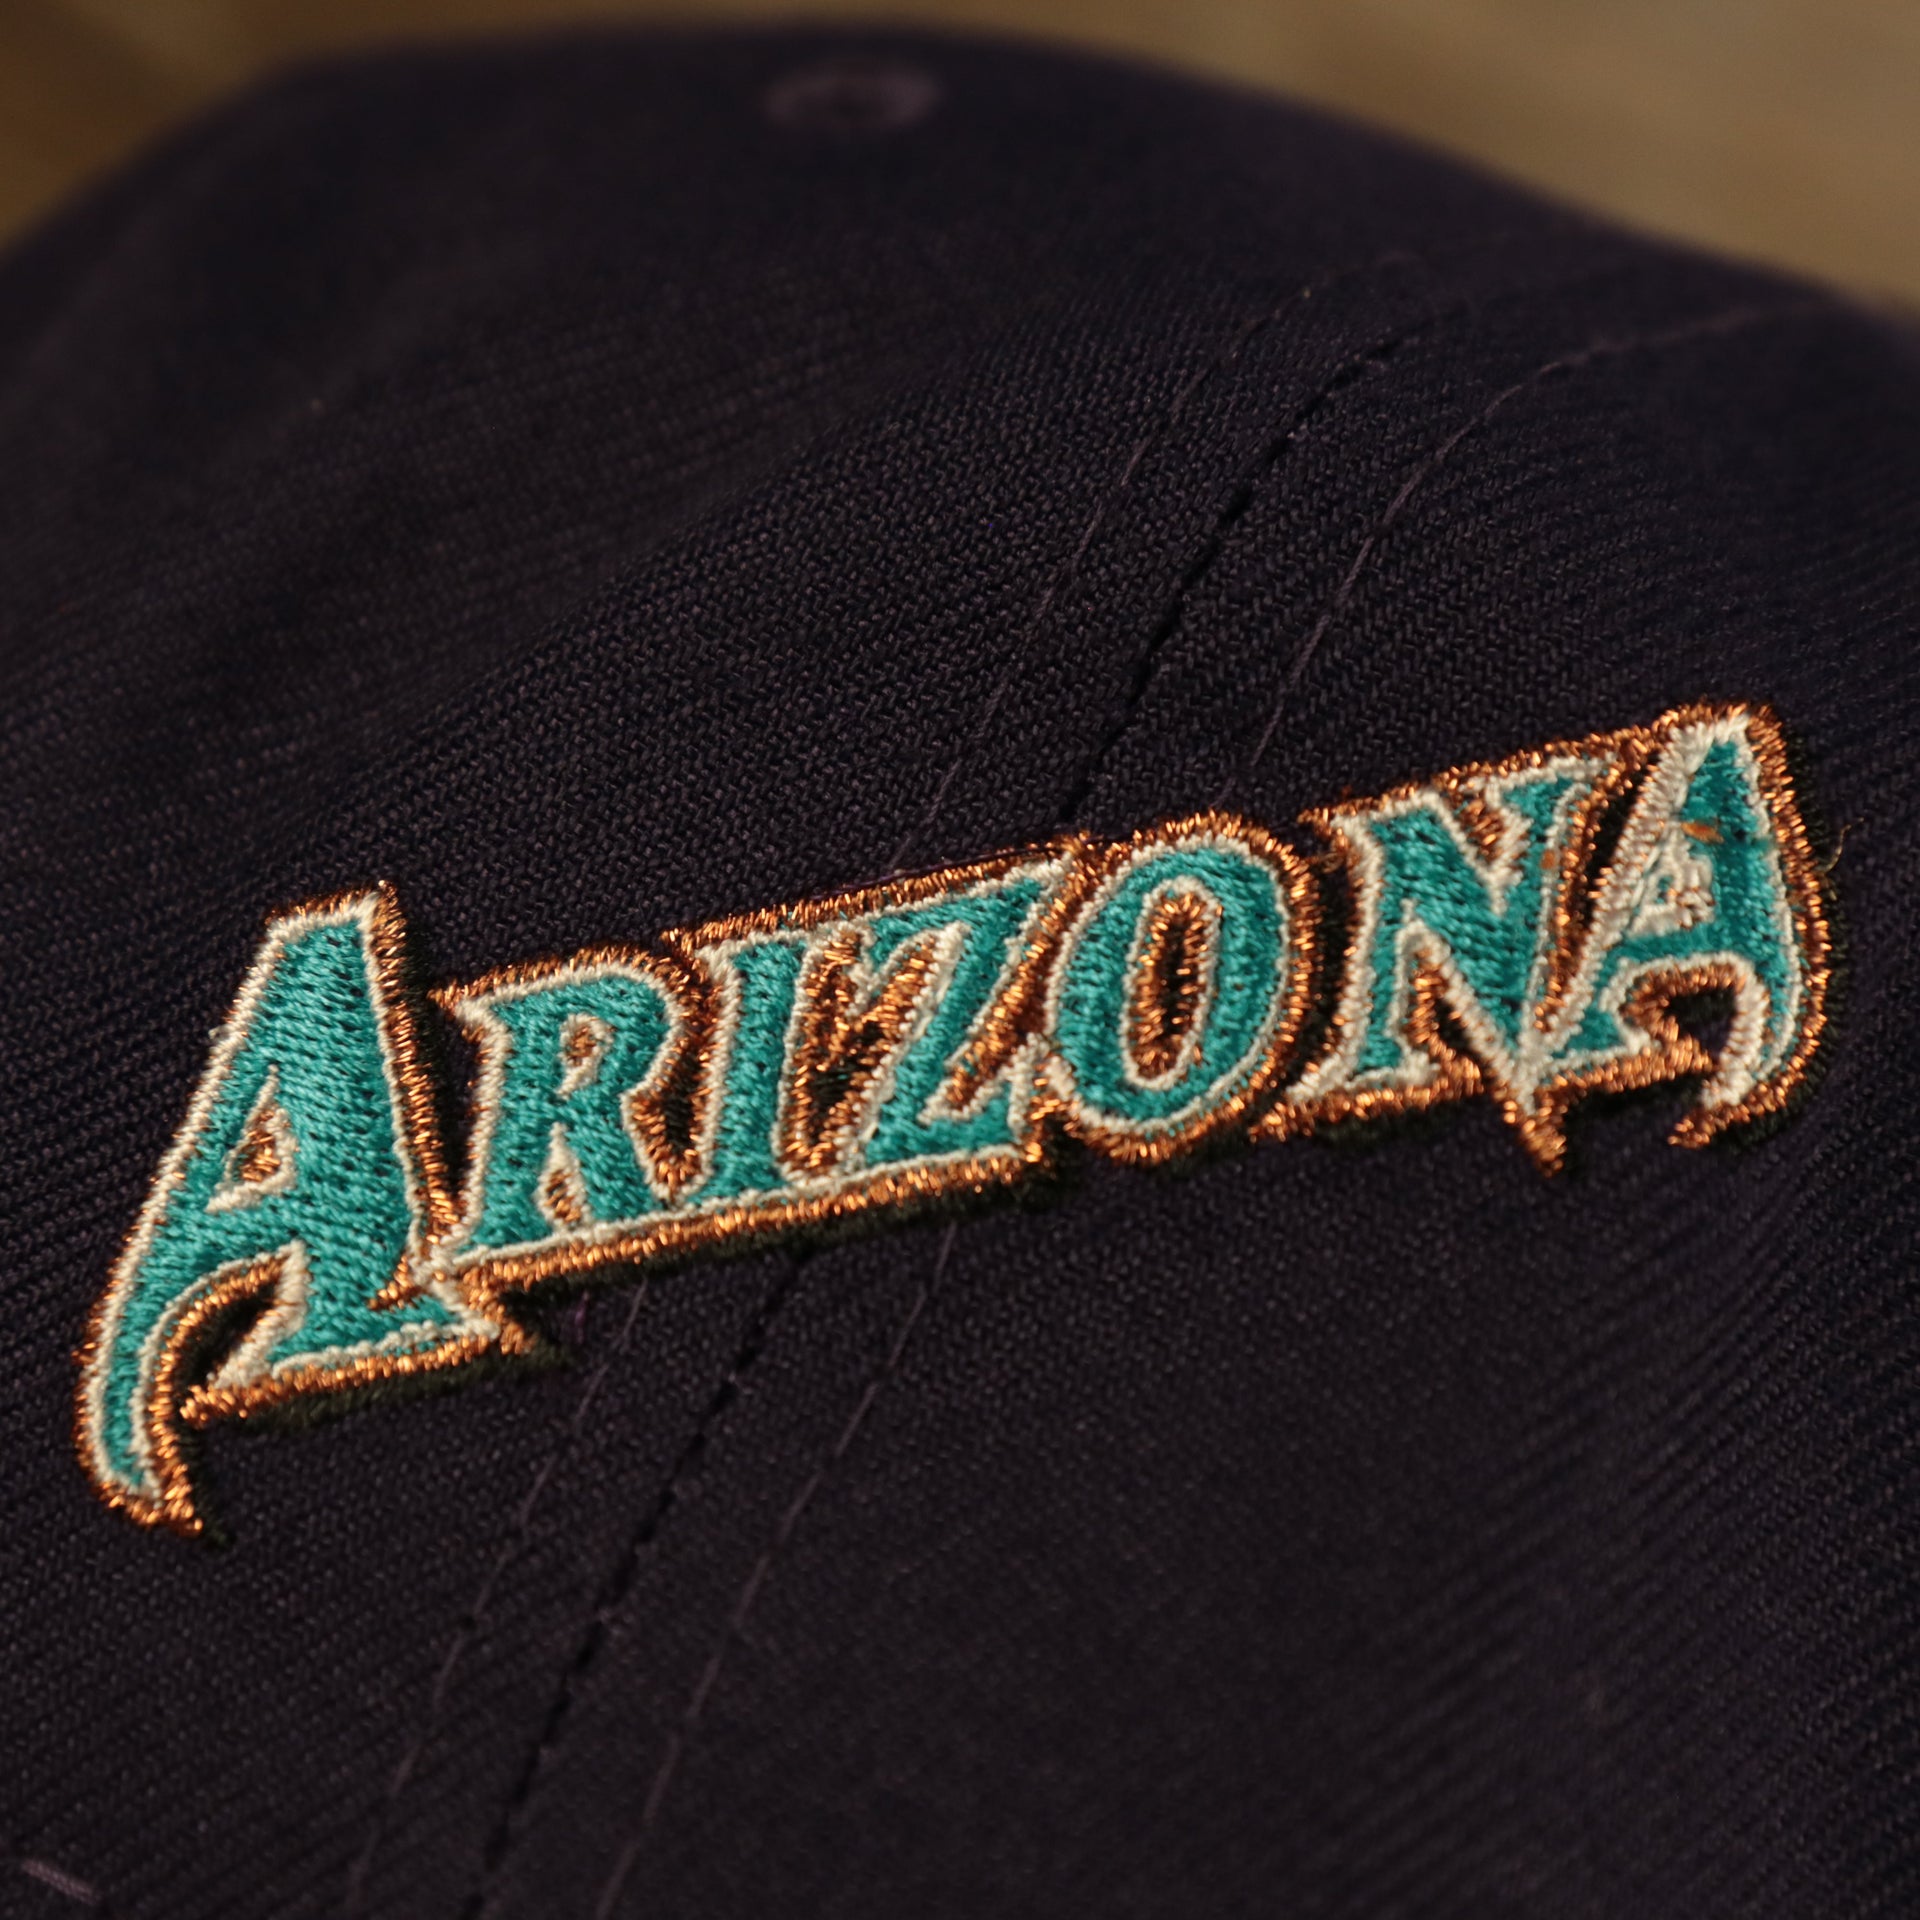 Arizona retro wording Arizona Diamondbacks Cooperstown "Championship Rings" All Over Side Patch Gray Bottom 59FIFTY Fitted Cap 